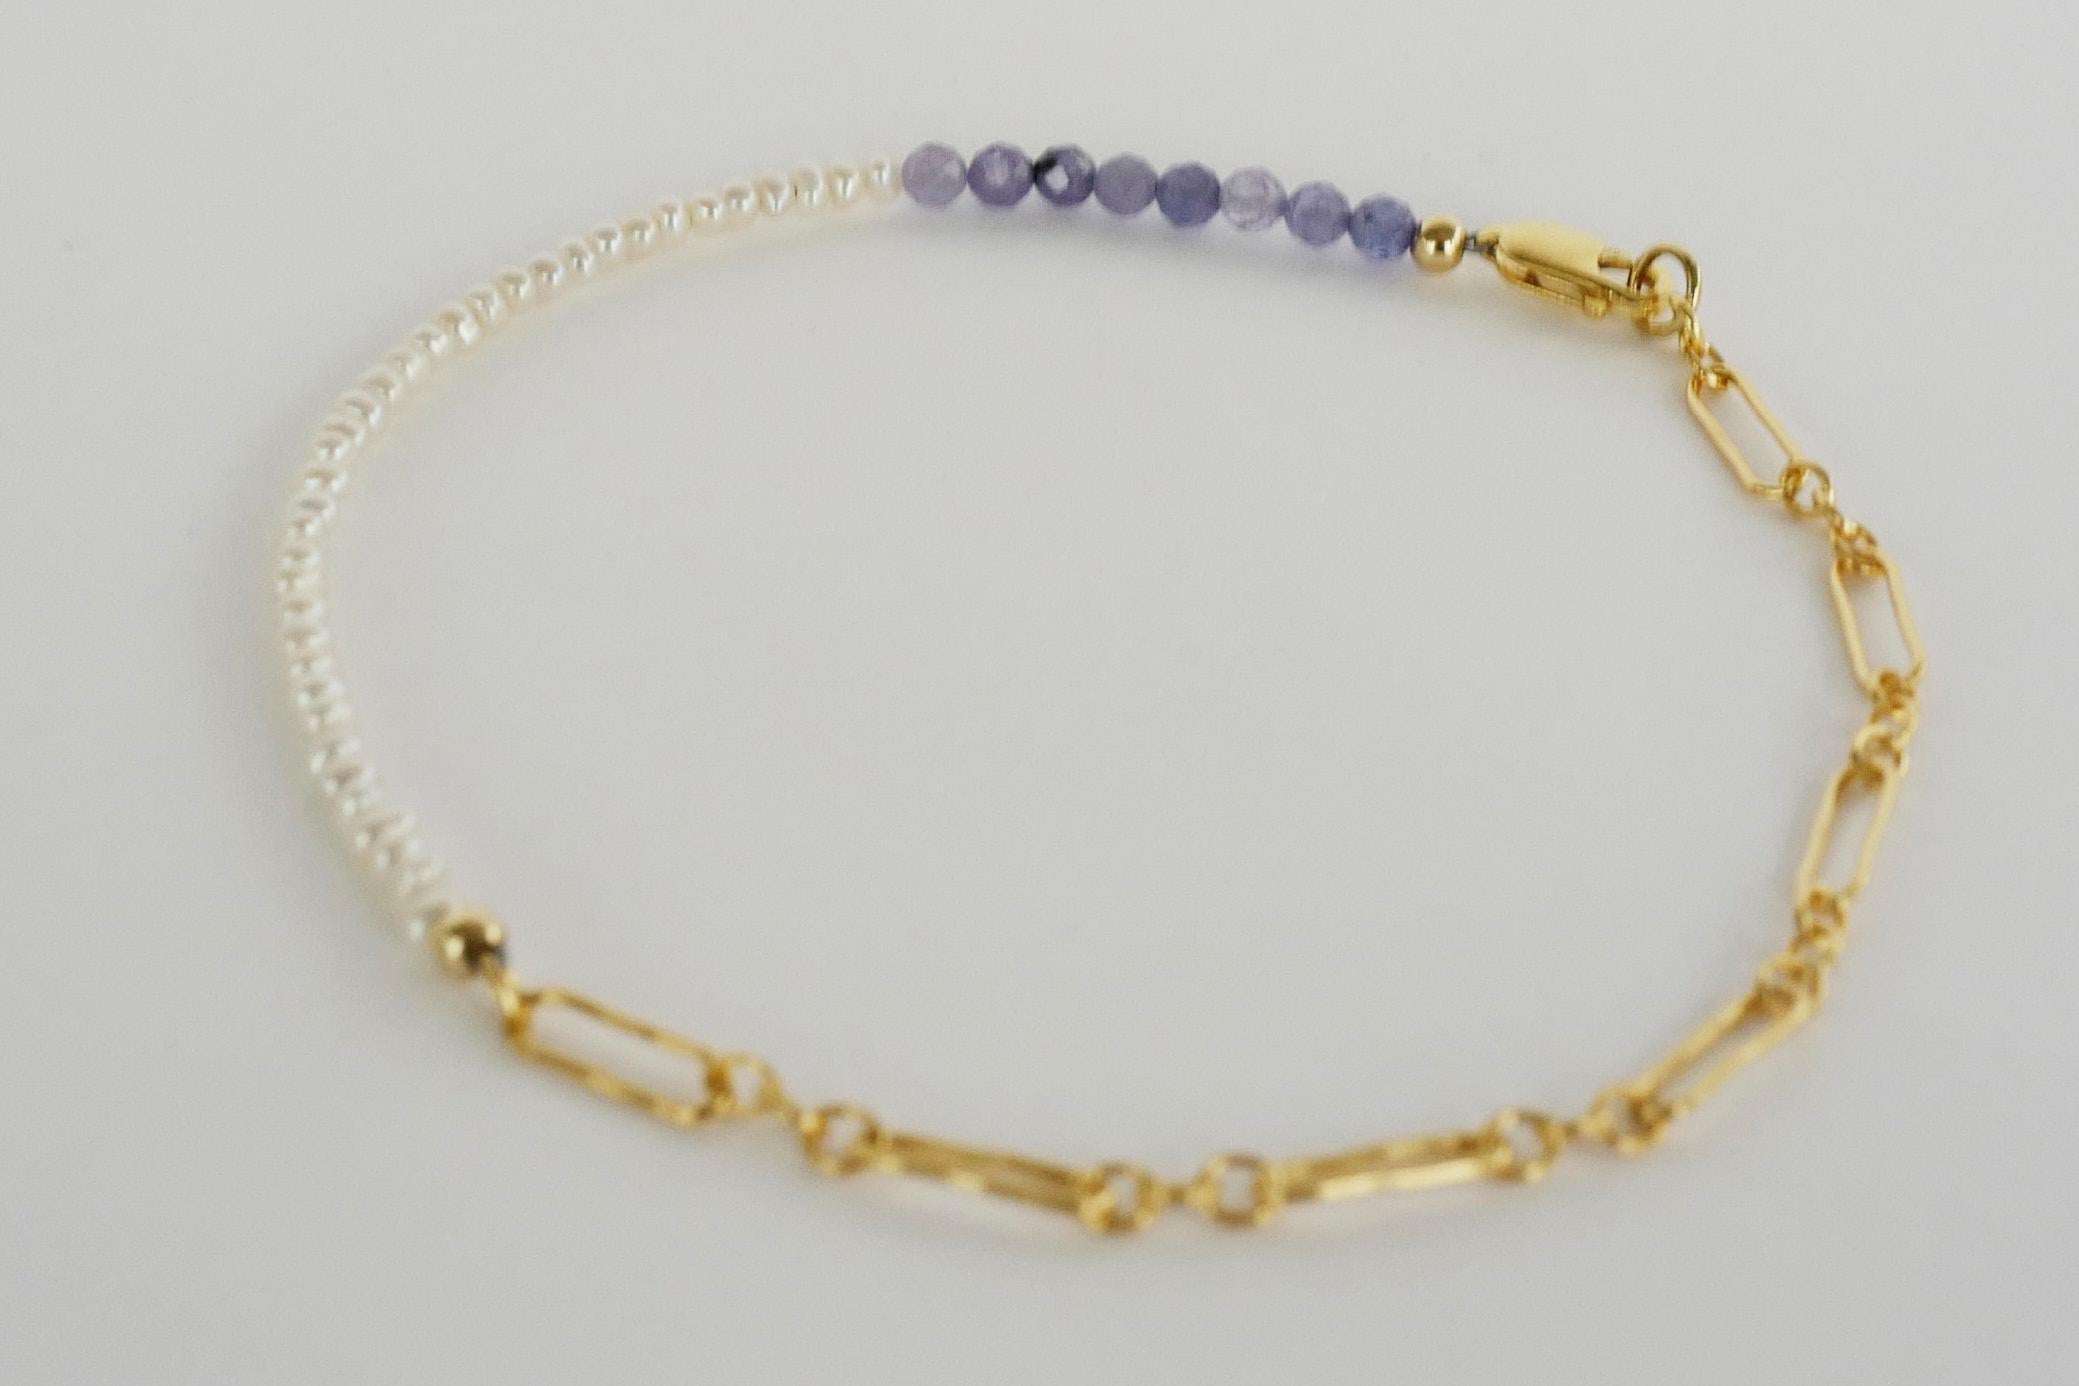 Romantic Tanzanite White Pearl Gold Filled Chain Beaded Ankle Bracelet J Dauphin For Sale